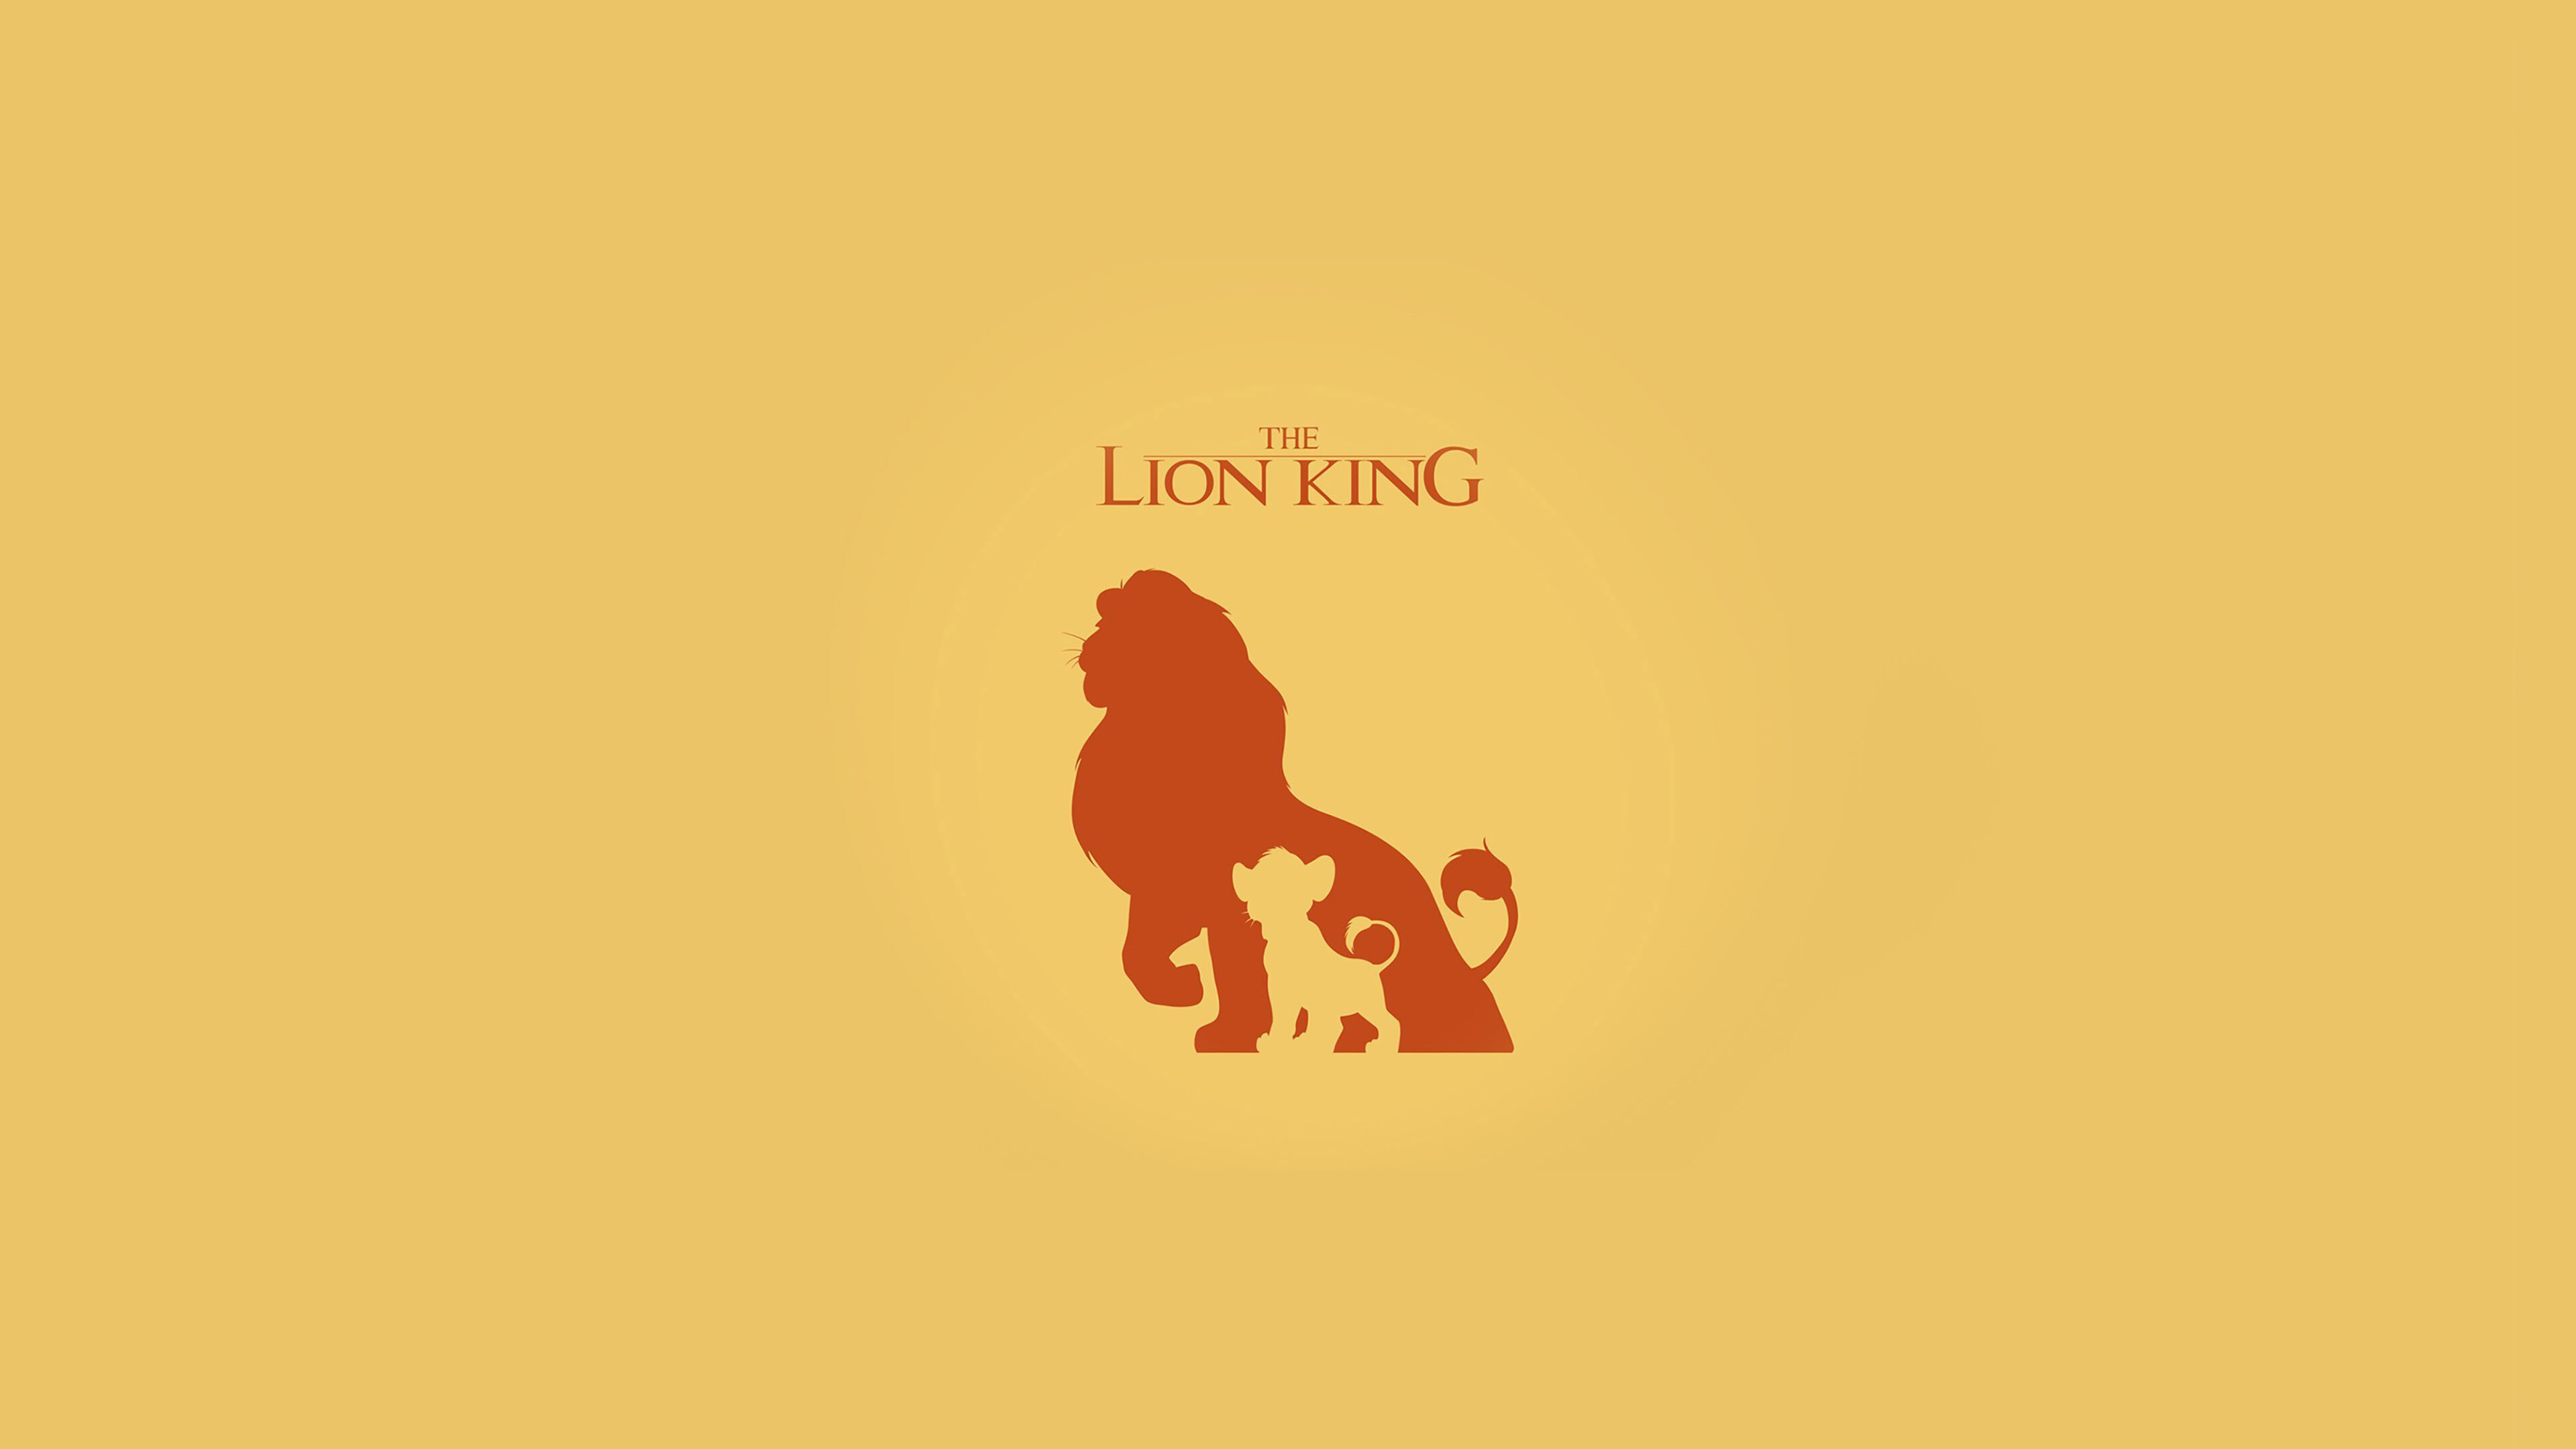 The Lion King: A 1994 American animated musical drama film, Produced by Walt Disney Feature Animation. 3840x2160 4K Wallpaper.